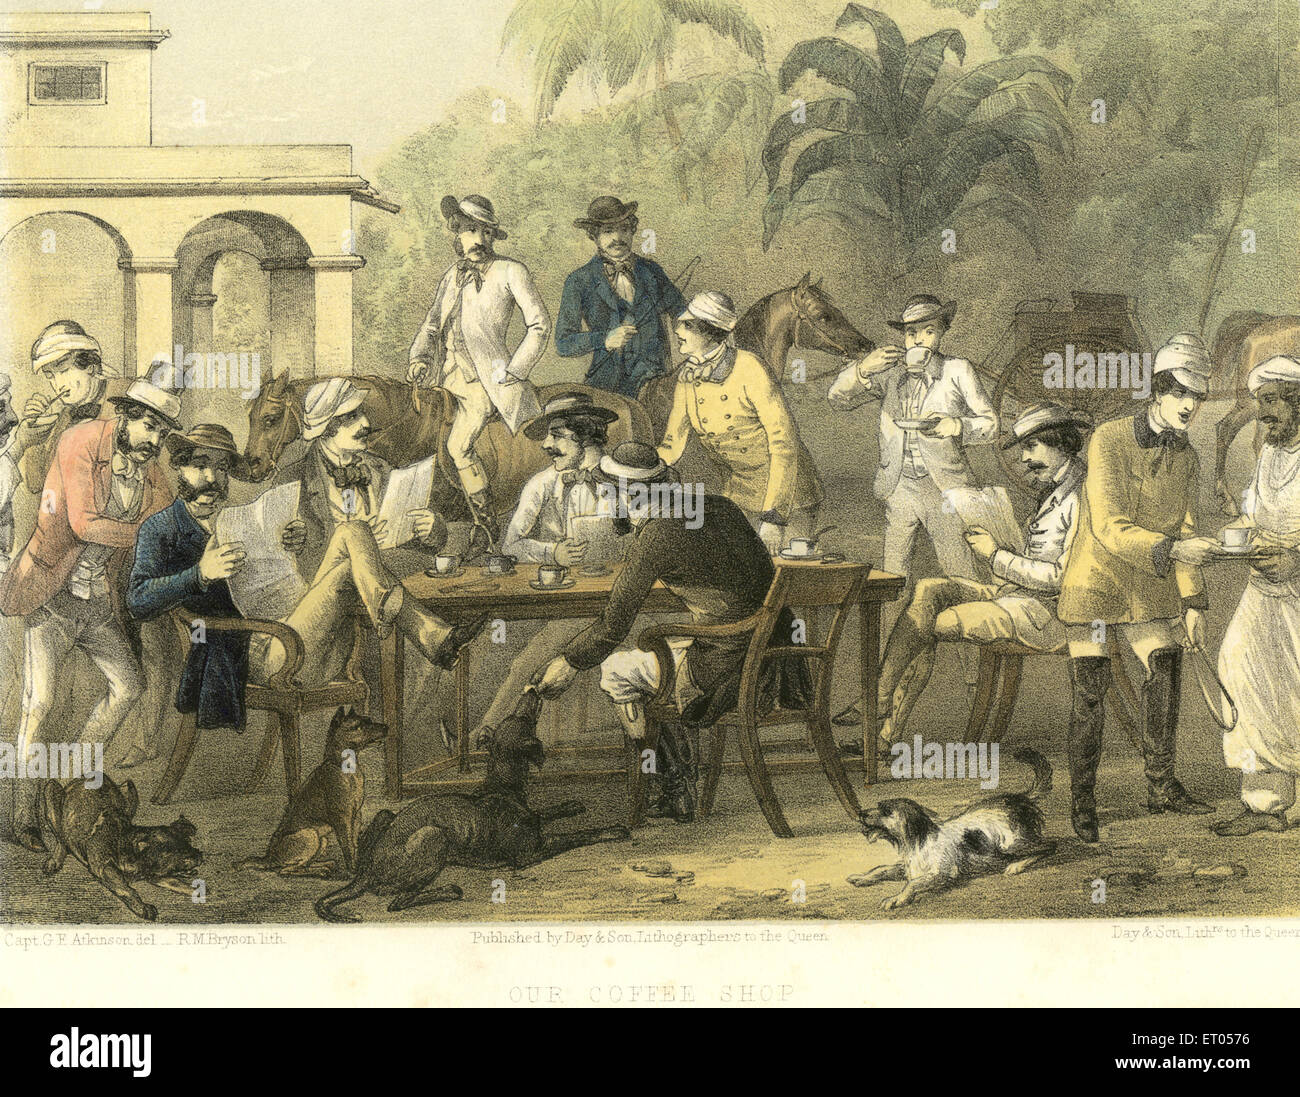 Colonial Indian images ; our coffee shop ; India Stock Photo